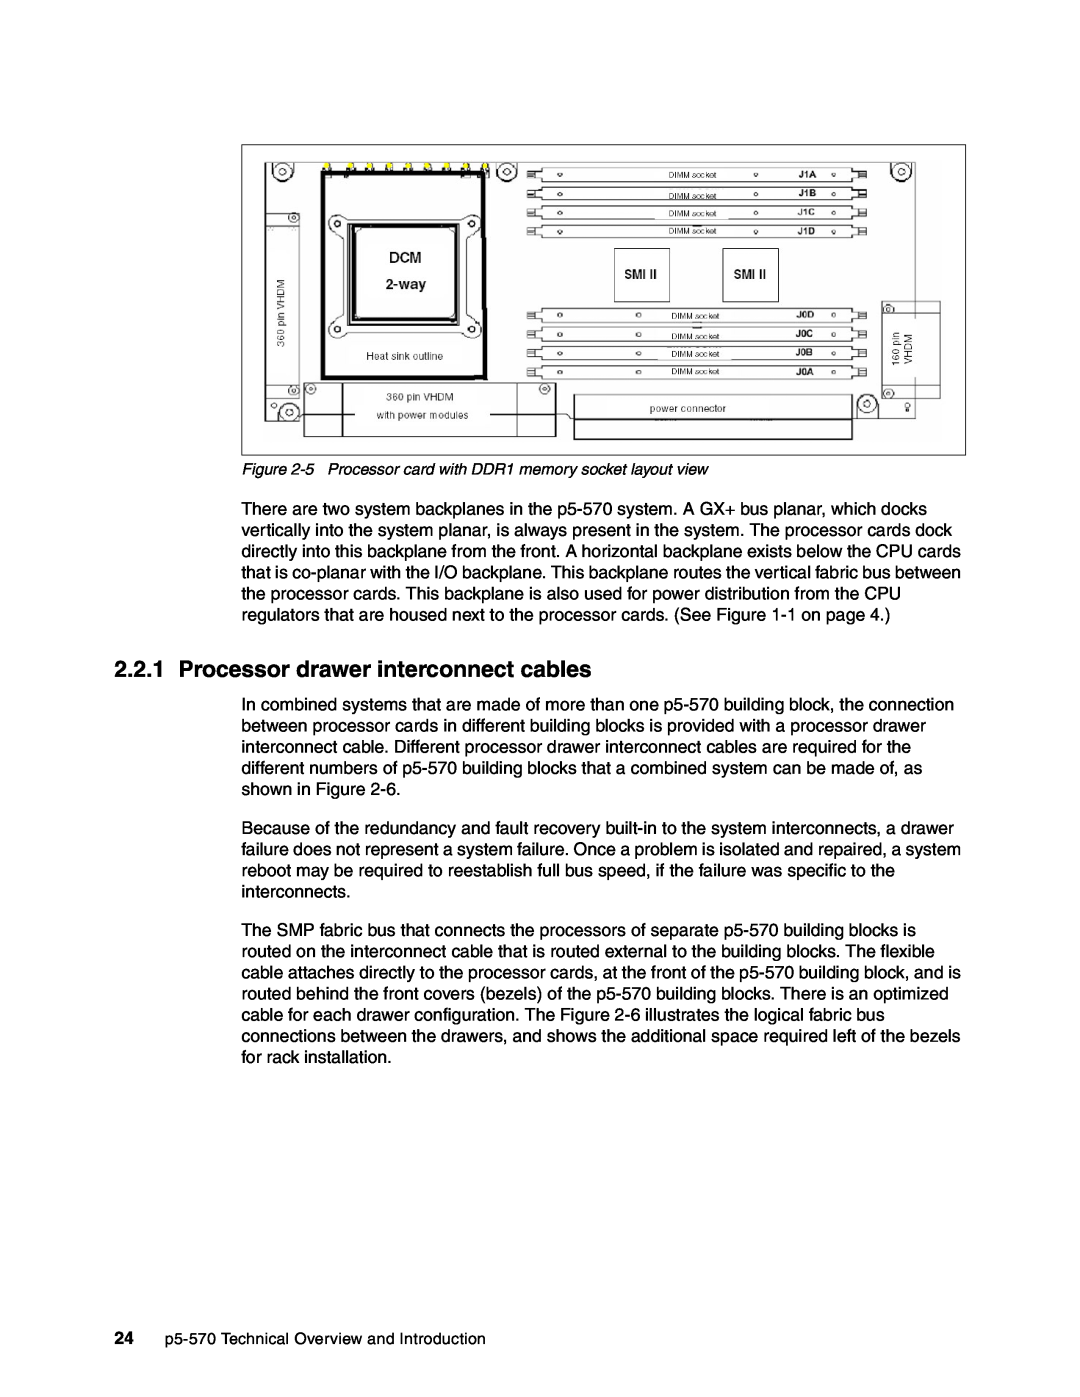 IBM P5 570 manual Processor drawer interconnect cables, 24p5-570Technical Overview and Introduction 